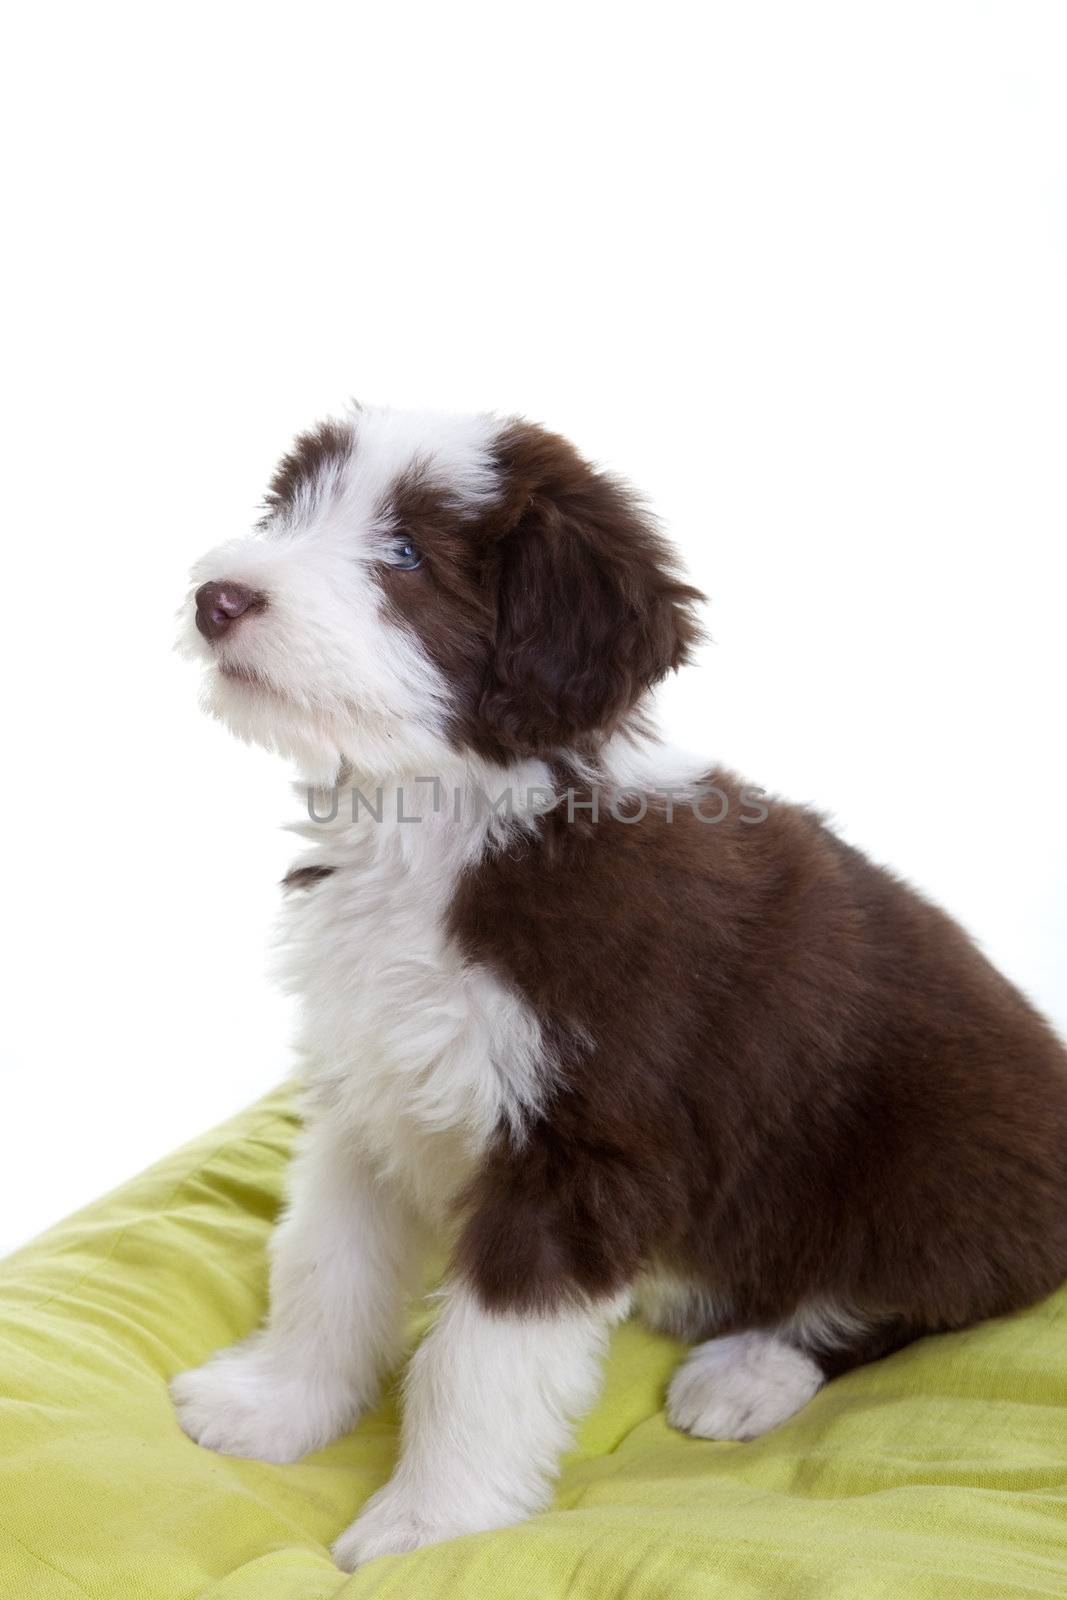 Cute young bearded collie pup sitting on it's pilow